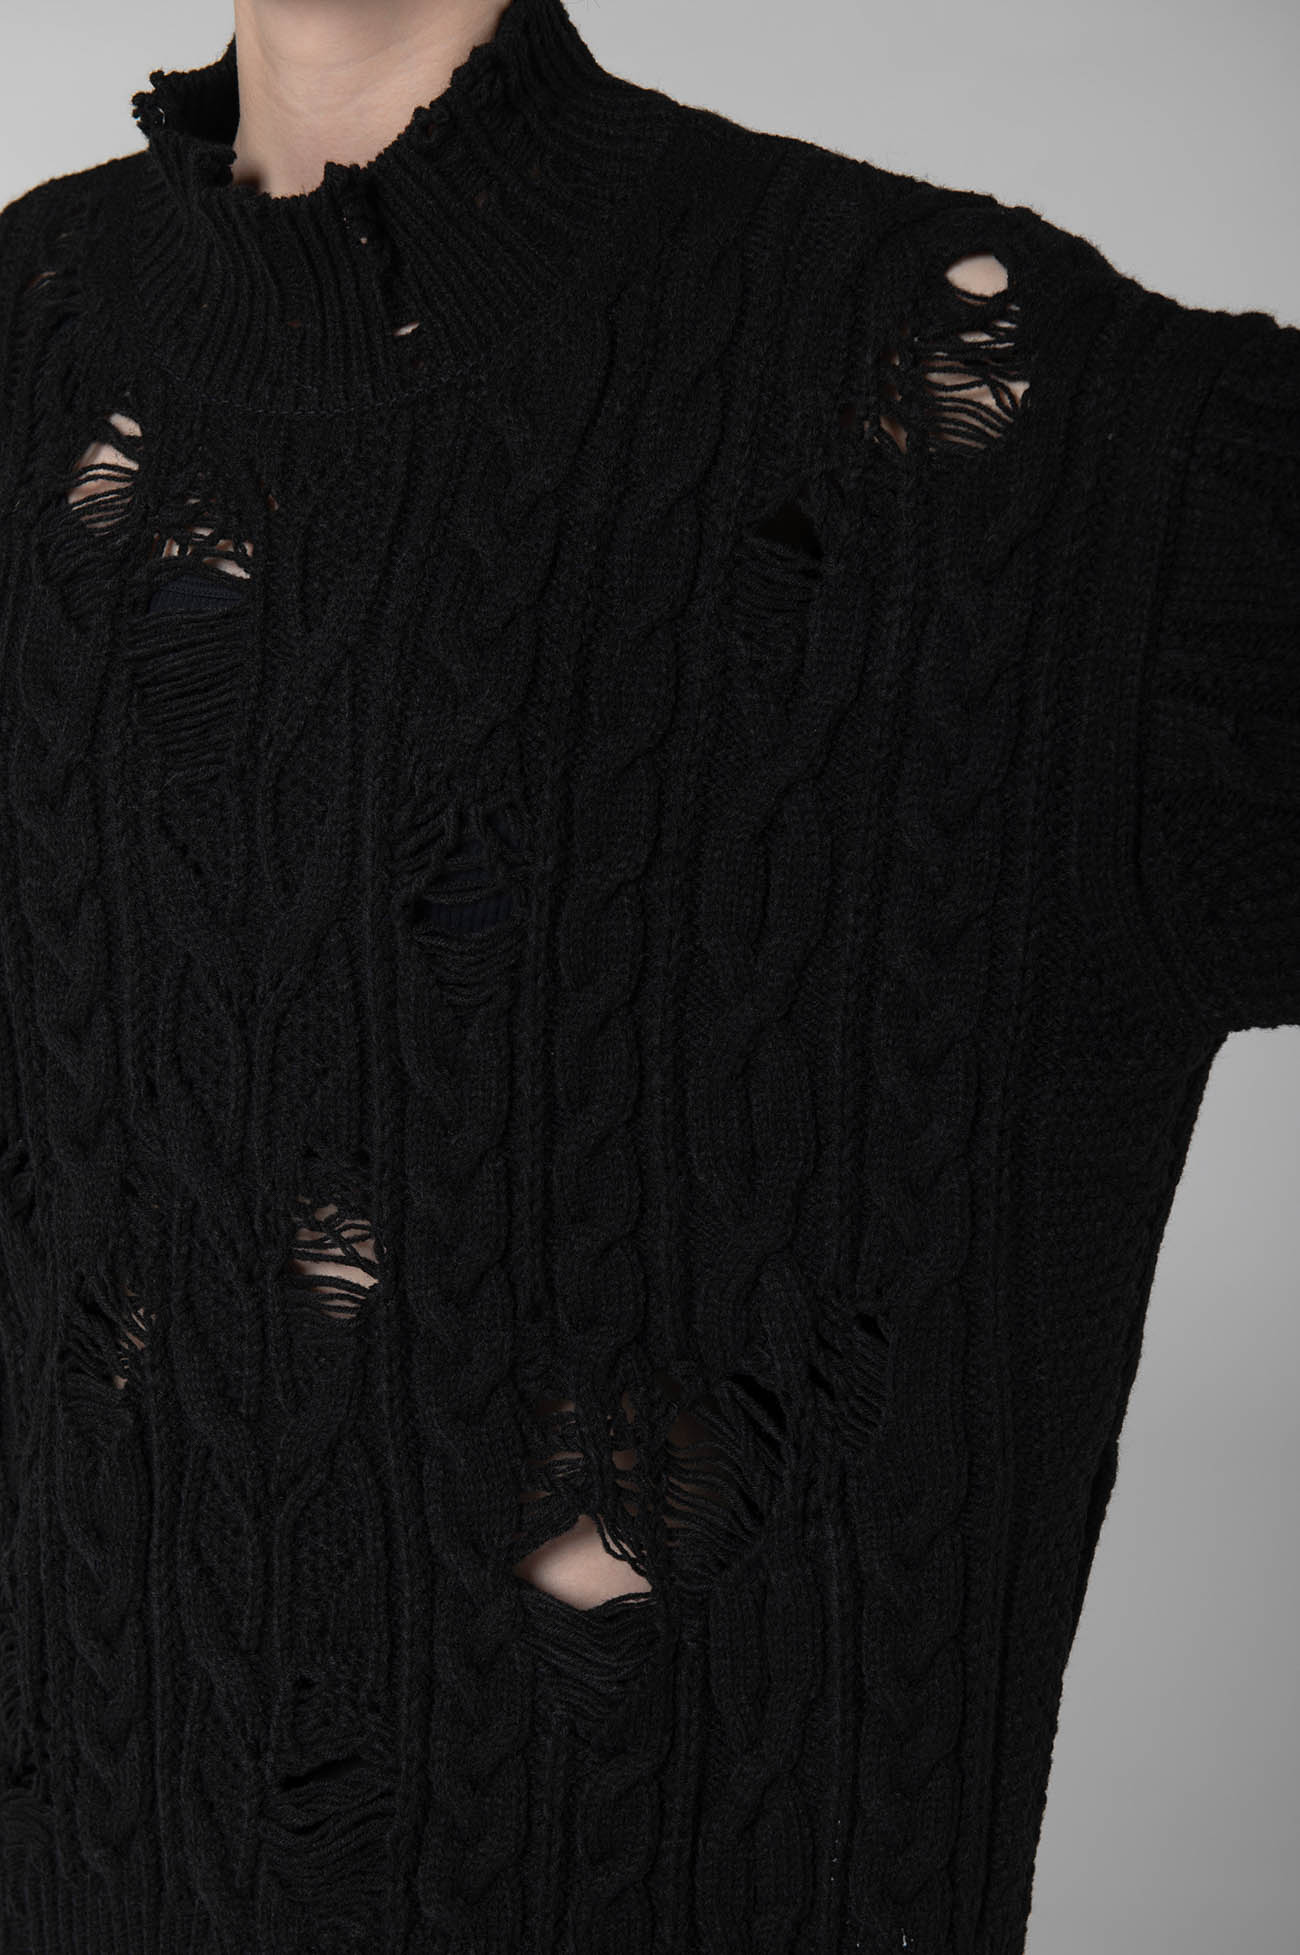 ACRYLIC WOOL RIPPED ARAN KNIT OVERSIZED PULLOVER